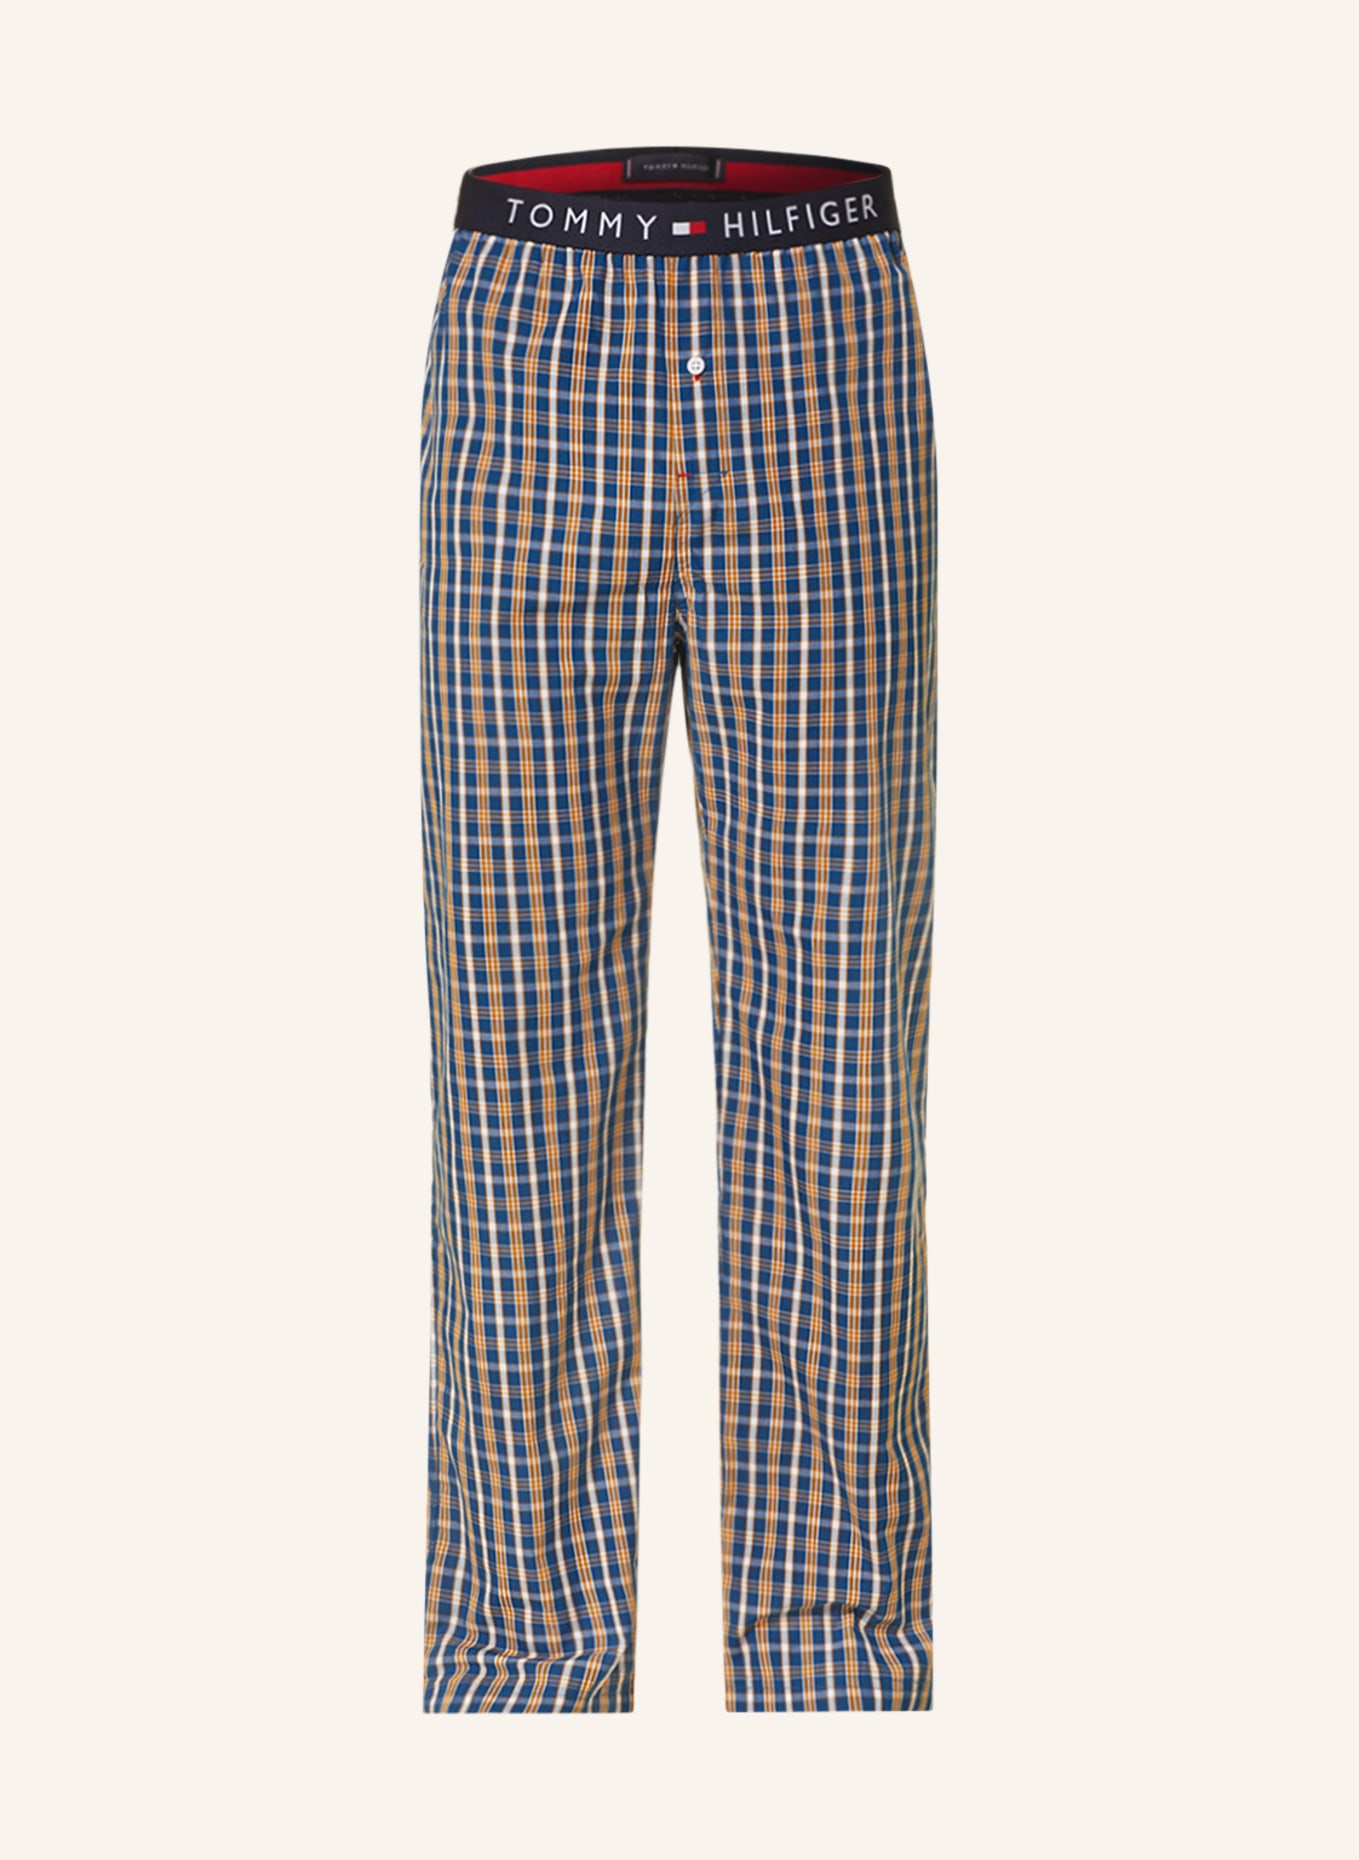 TOMMY HILFIGER Lounge pants, Color: BLUE/ WHITE/ DARK YELLOW (Image 1)